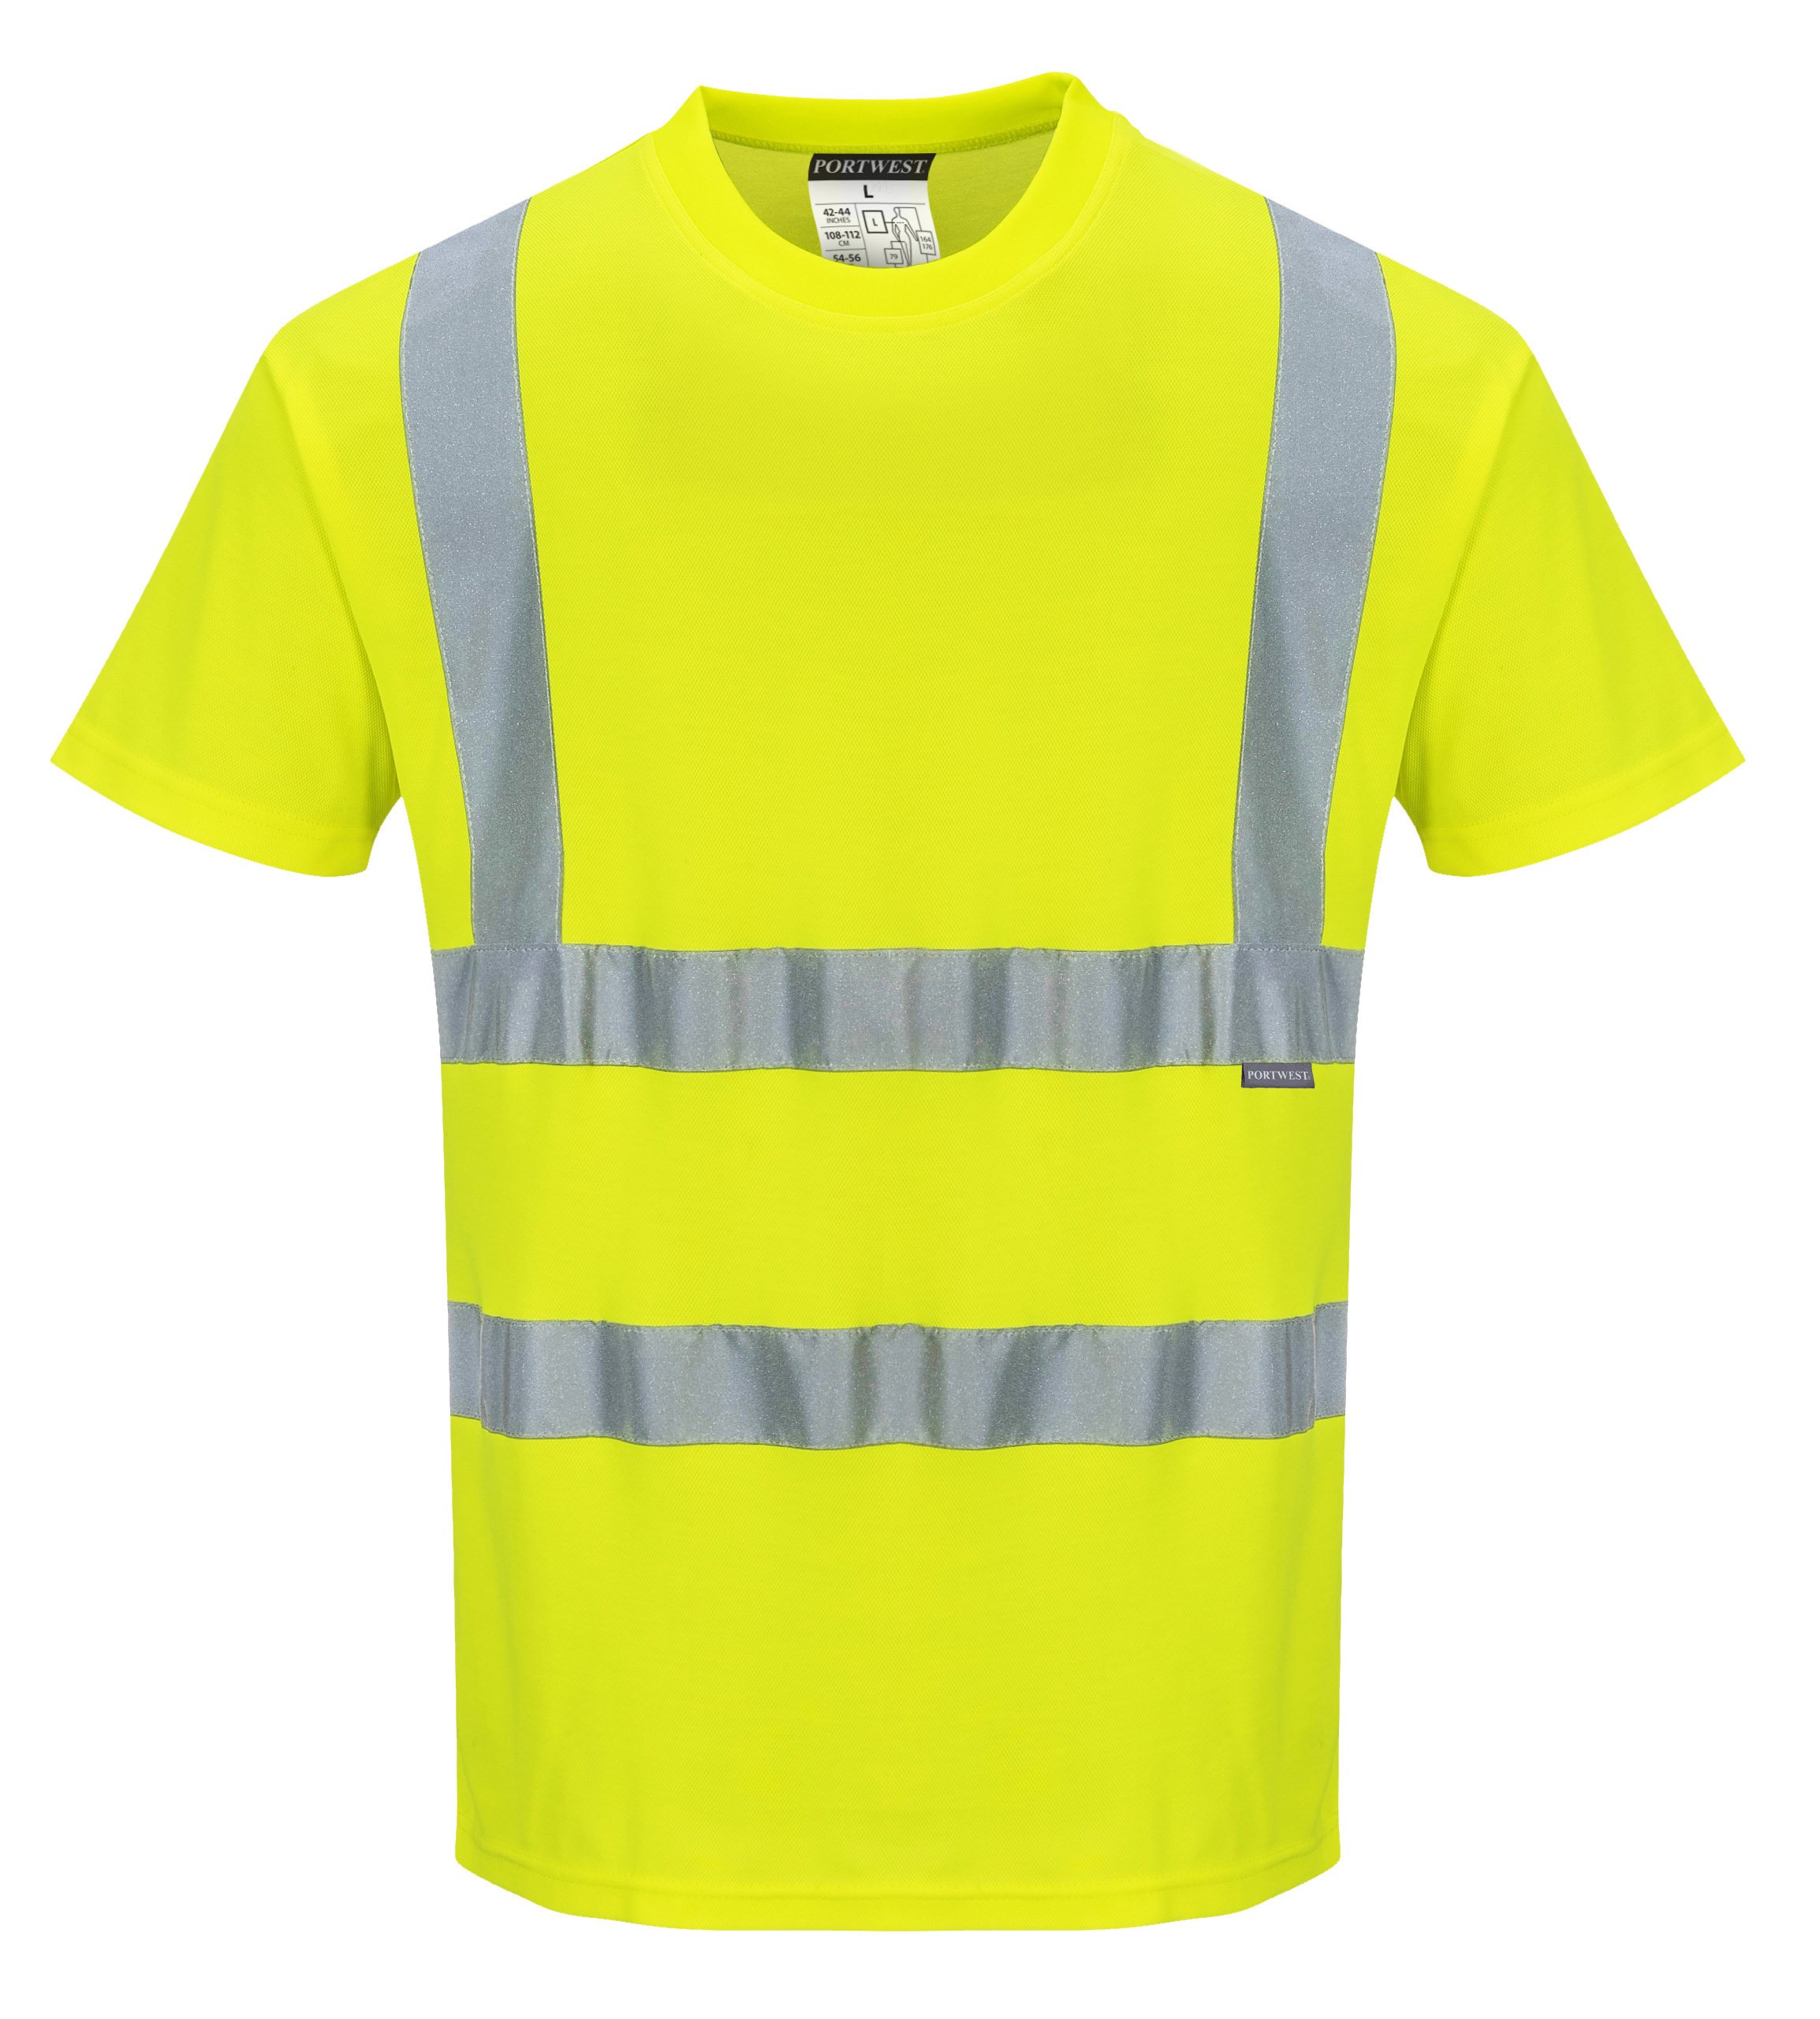 HYCOPROT High Visibility Reflective Safety Long Sleeve T Shirts Moisture Wicking Mesh Quick Dry Breathable Lightweight Reflective Tee 3XL, Yellow